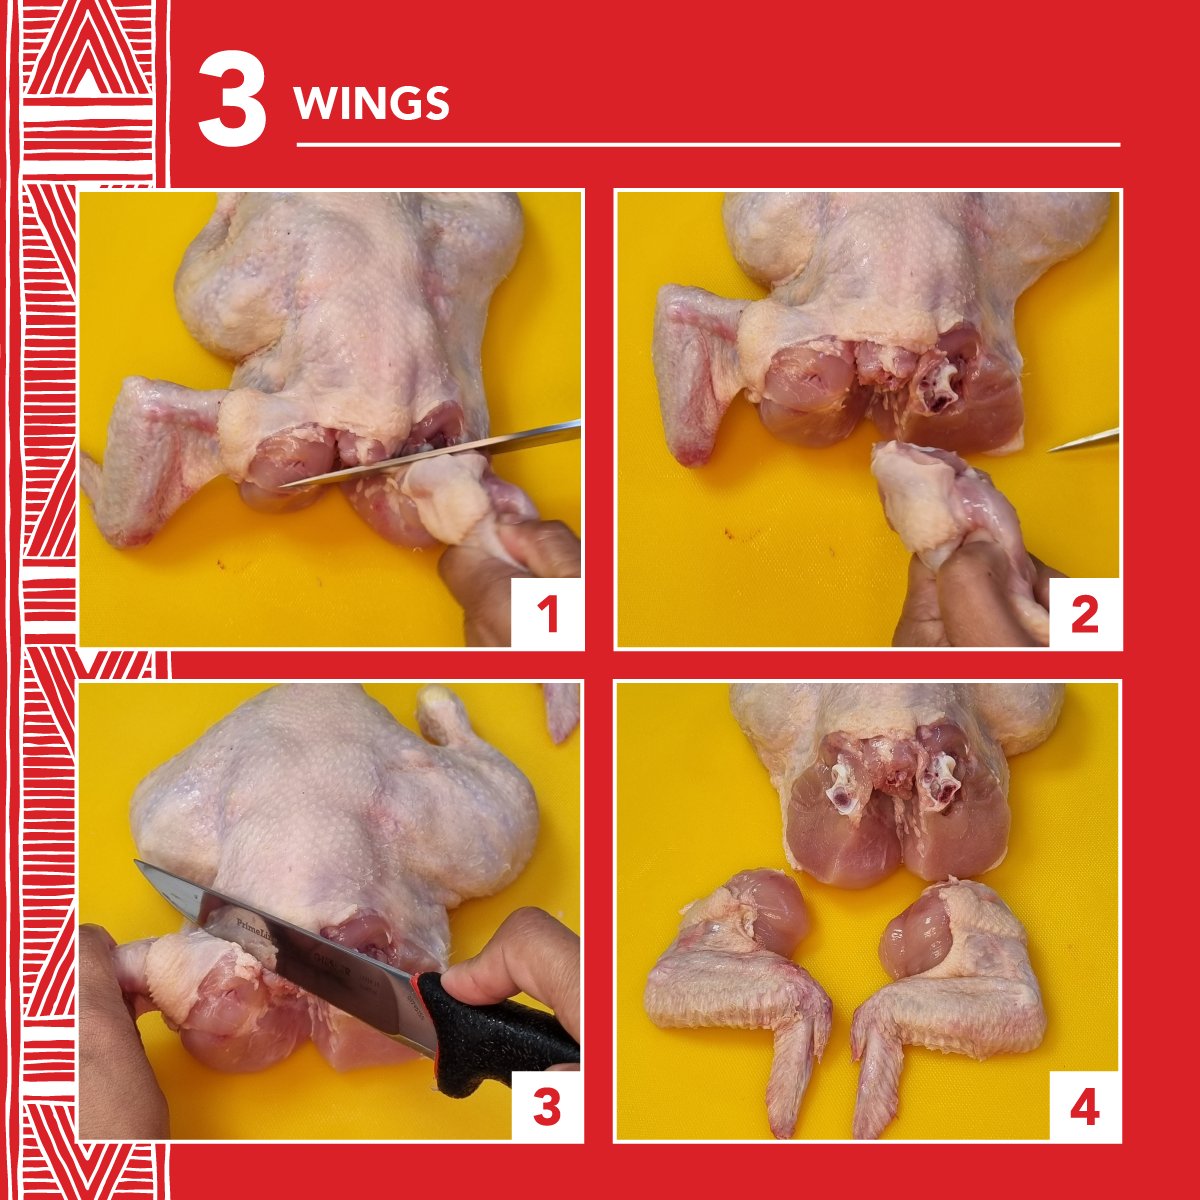 Best practice offers your deli counters best cuts and better profits. Here is a guide to basic cutting of fresh chicken into main portions. #DeliSpices #bestpractice #delicounters